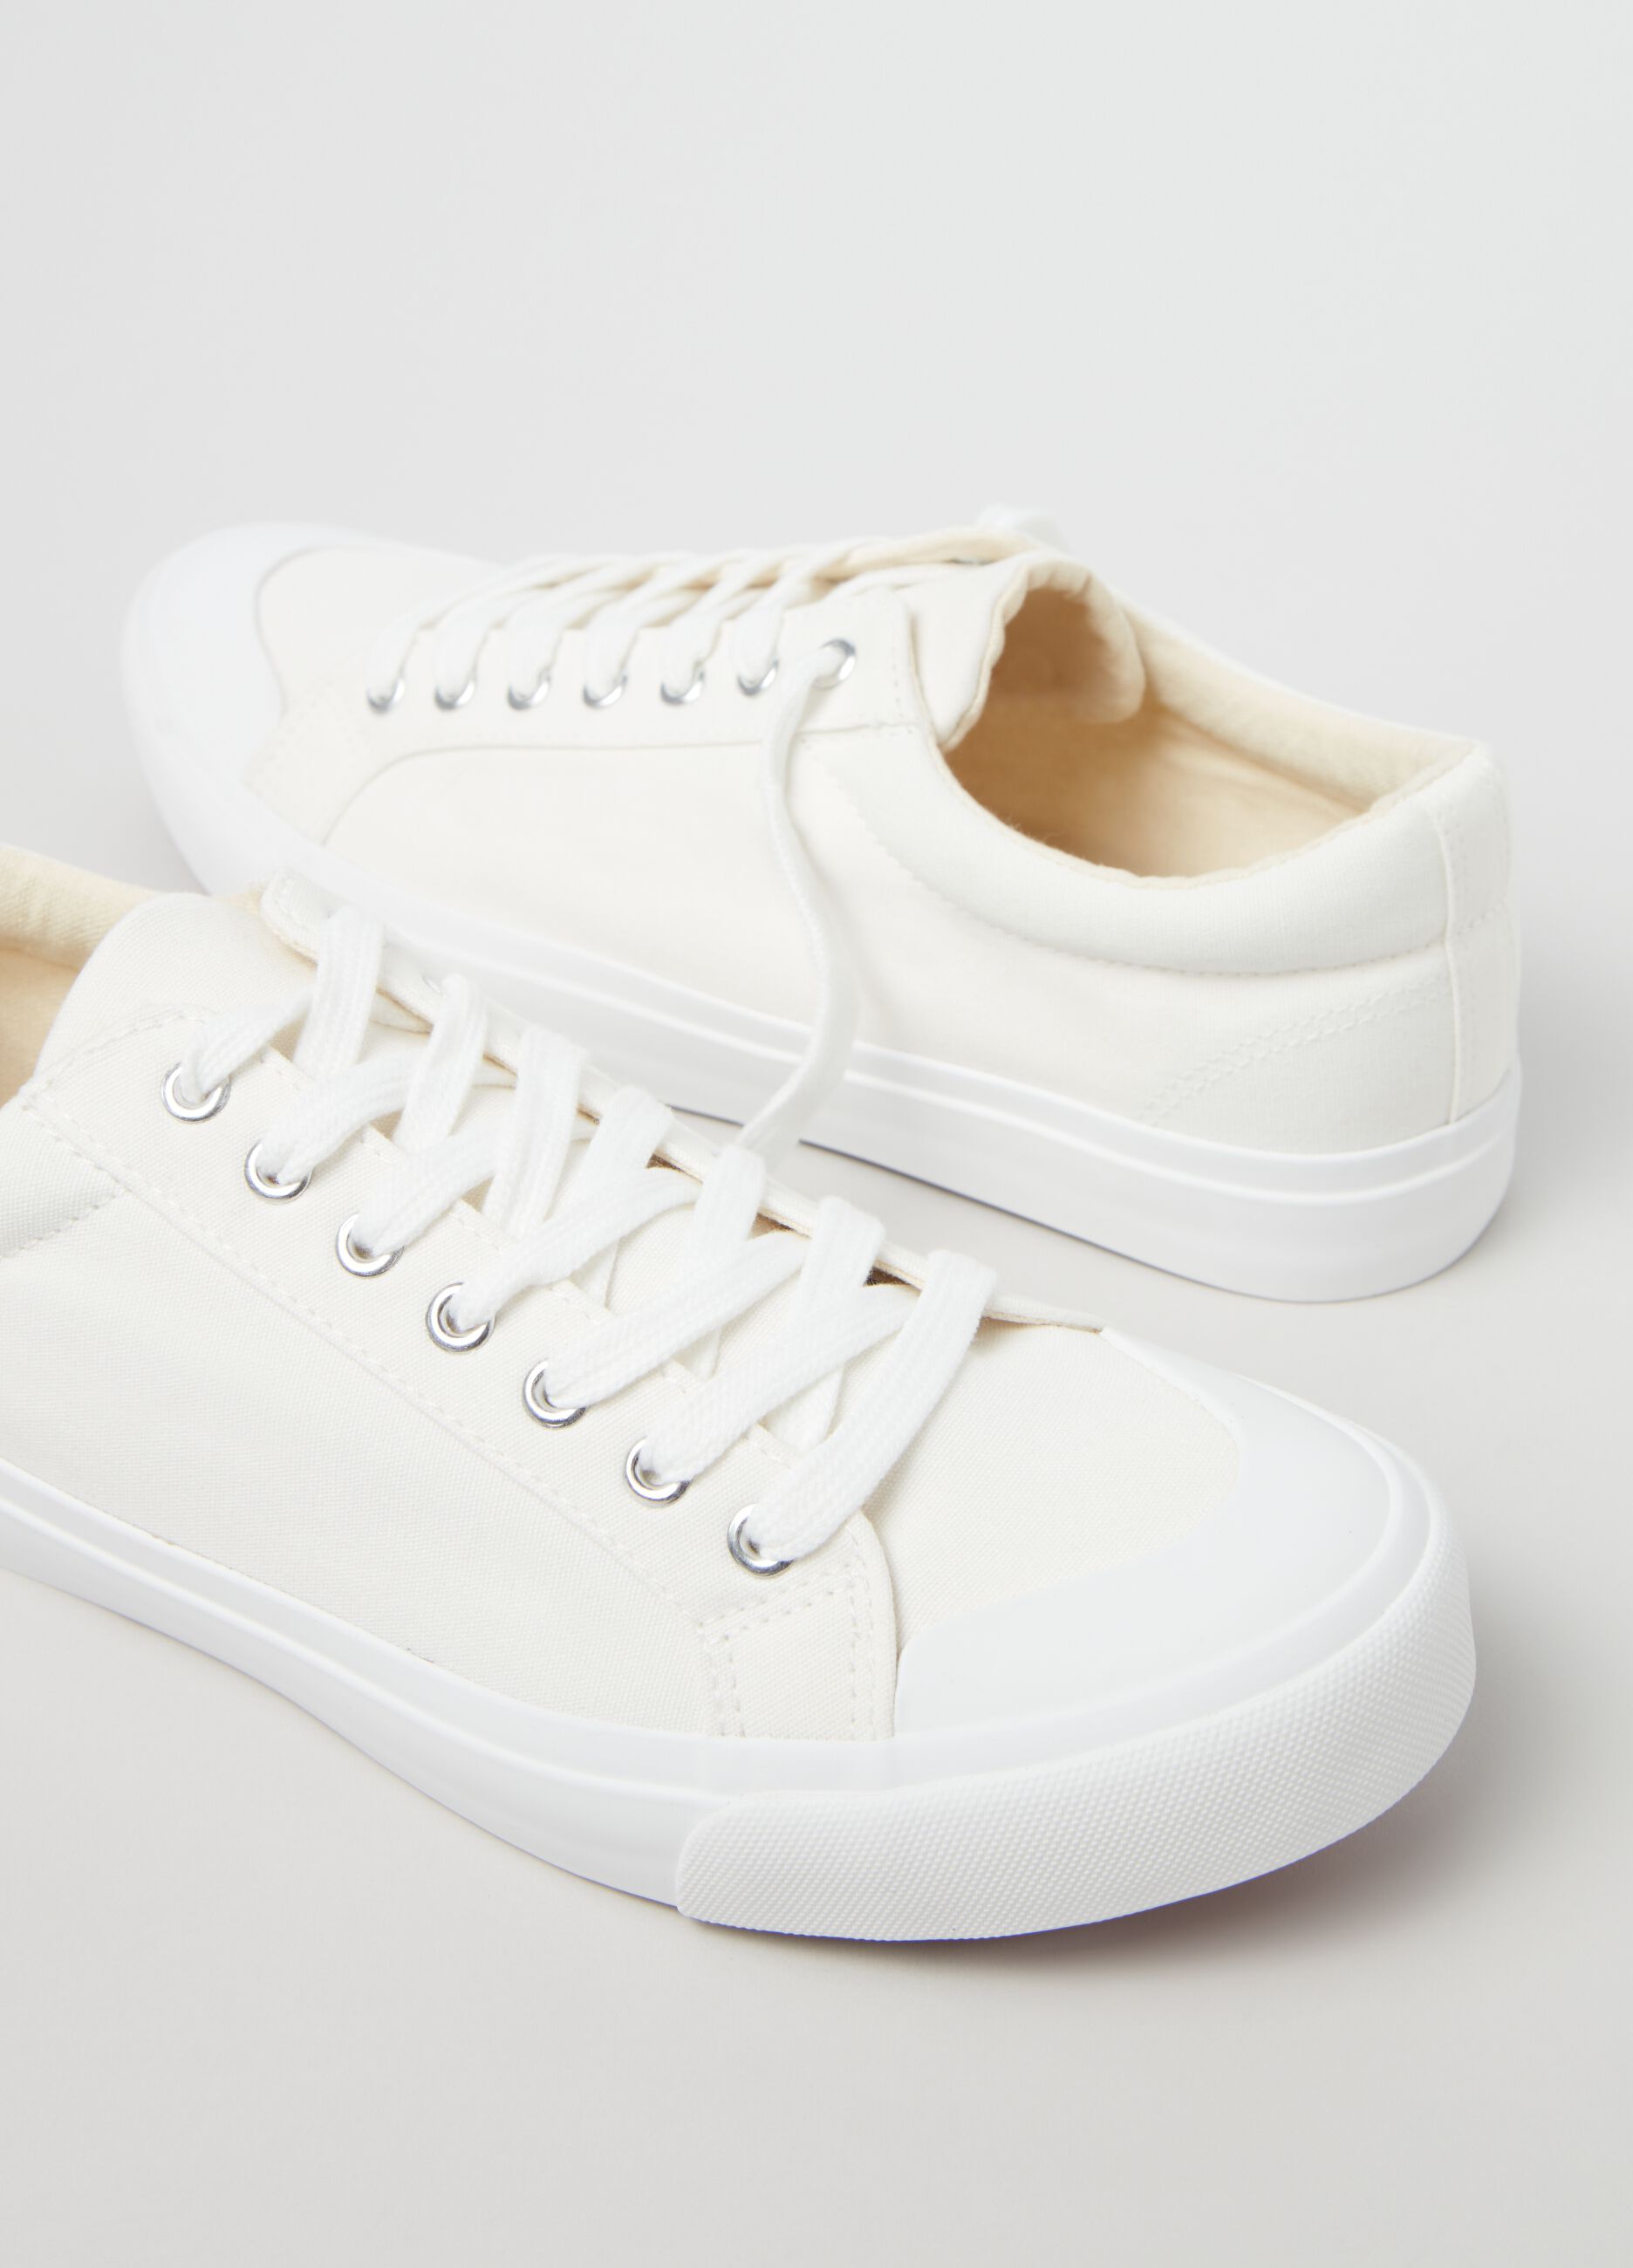 Cotton sneakers with laces